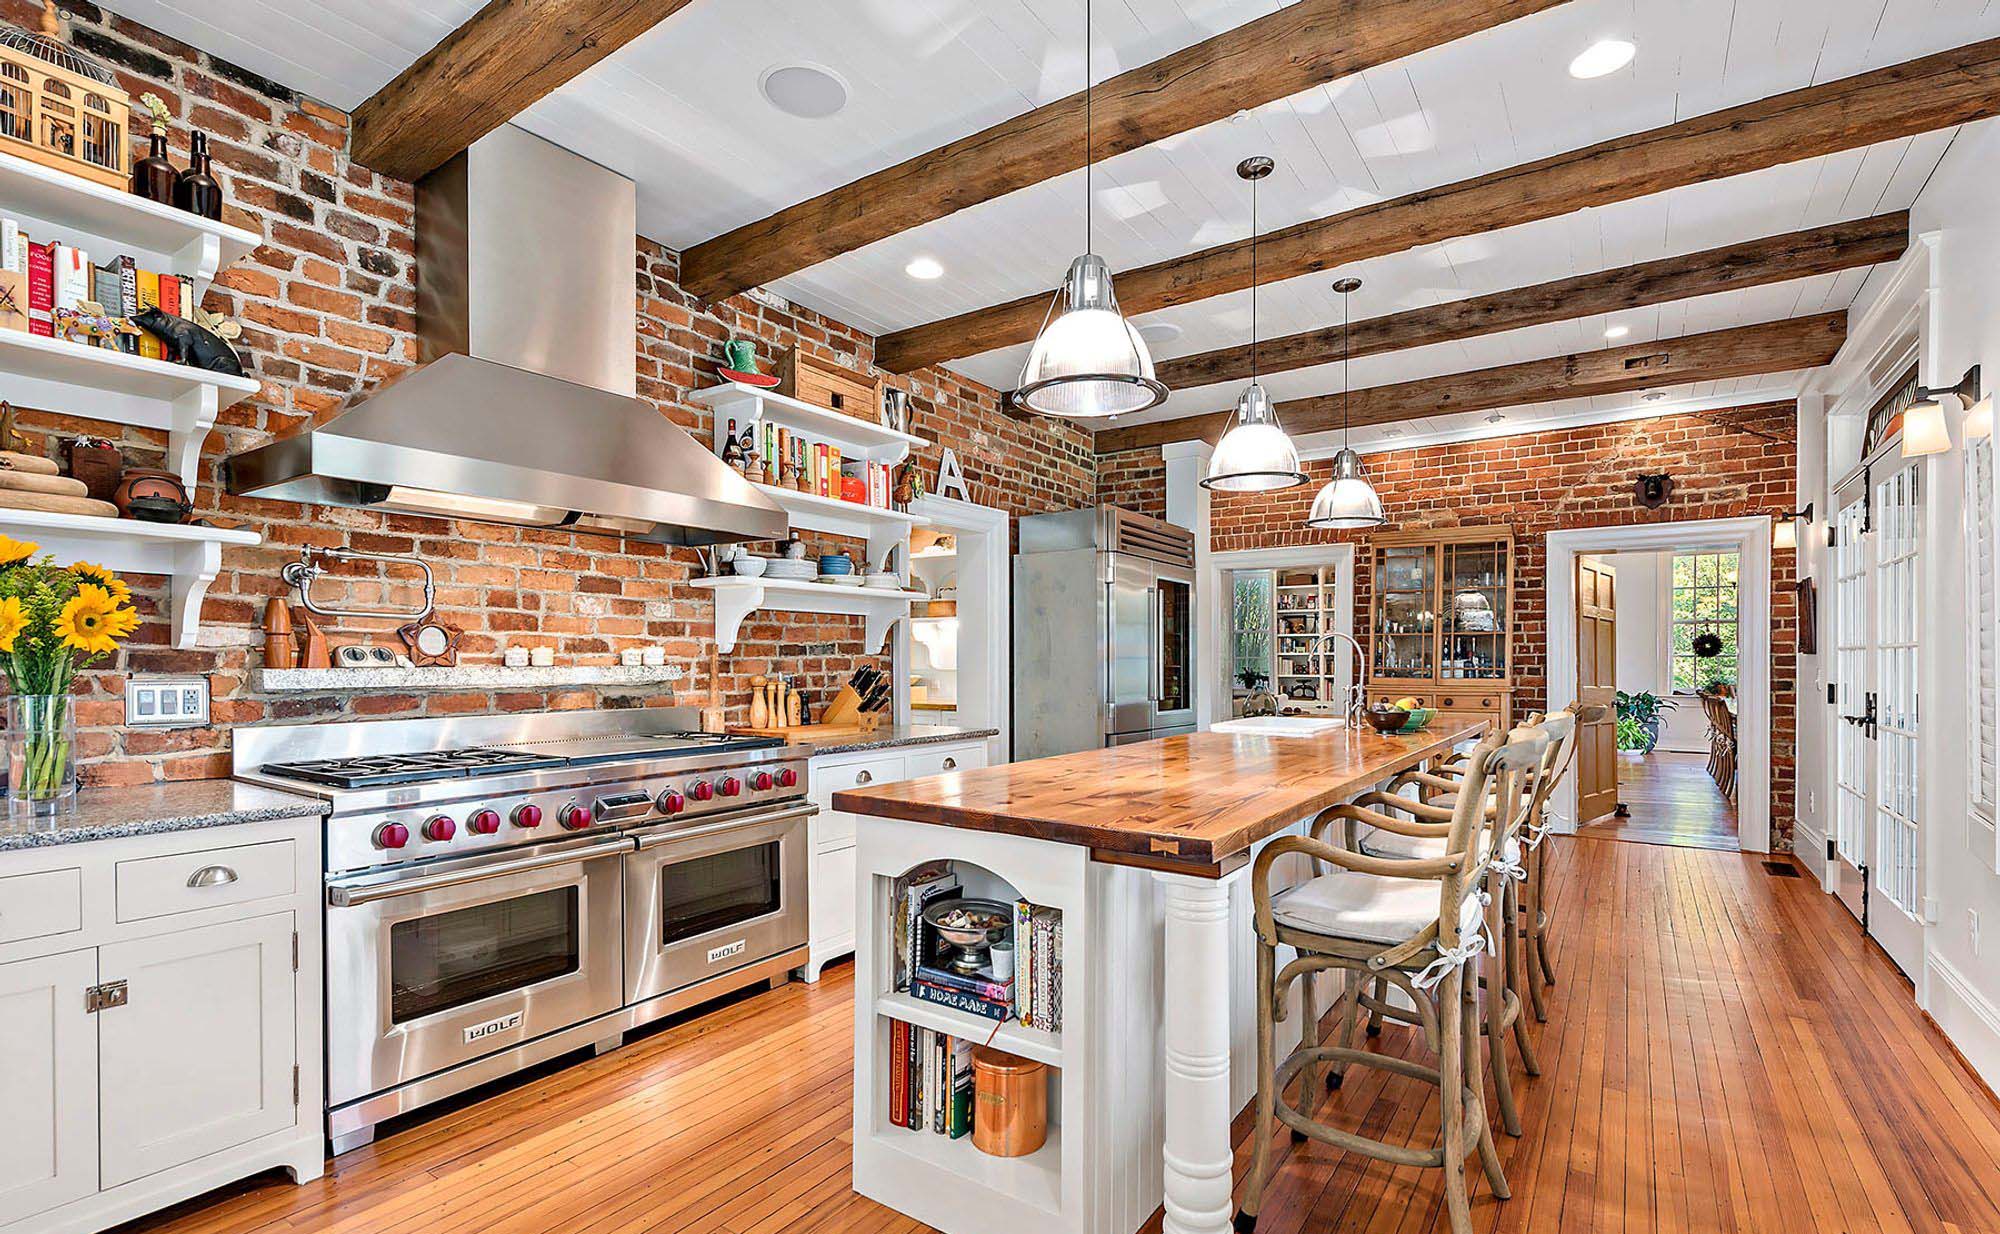 exposed wood kitchen ceiling beams with red brick wall and wood countertops